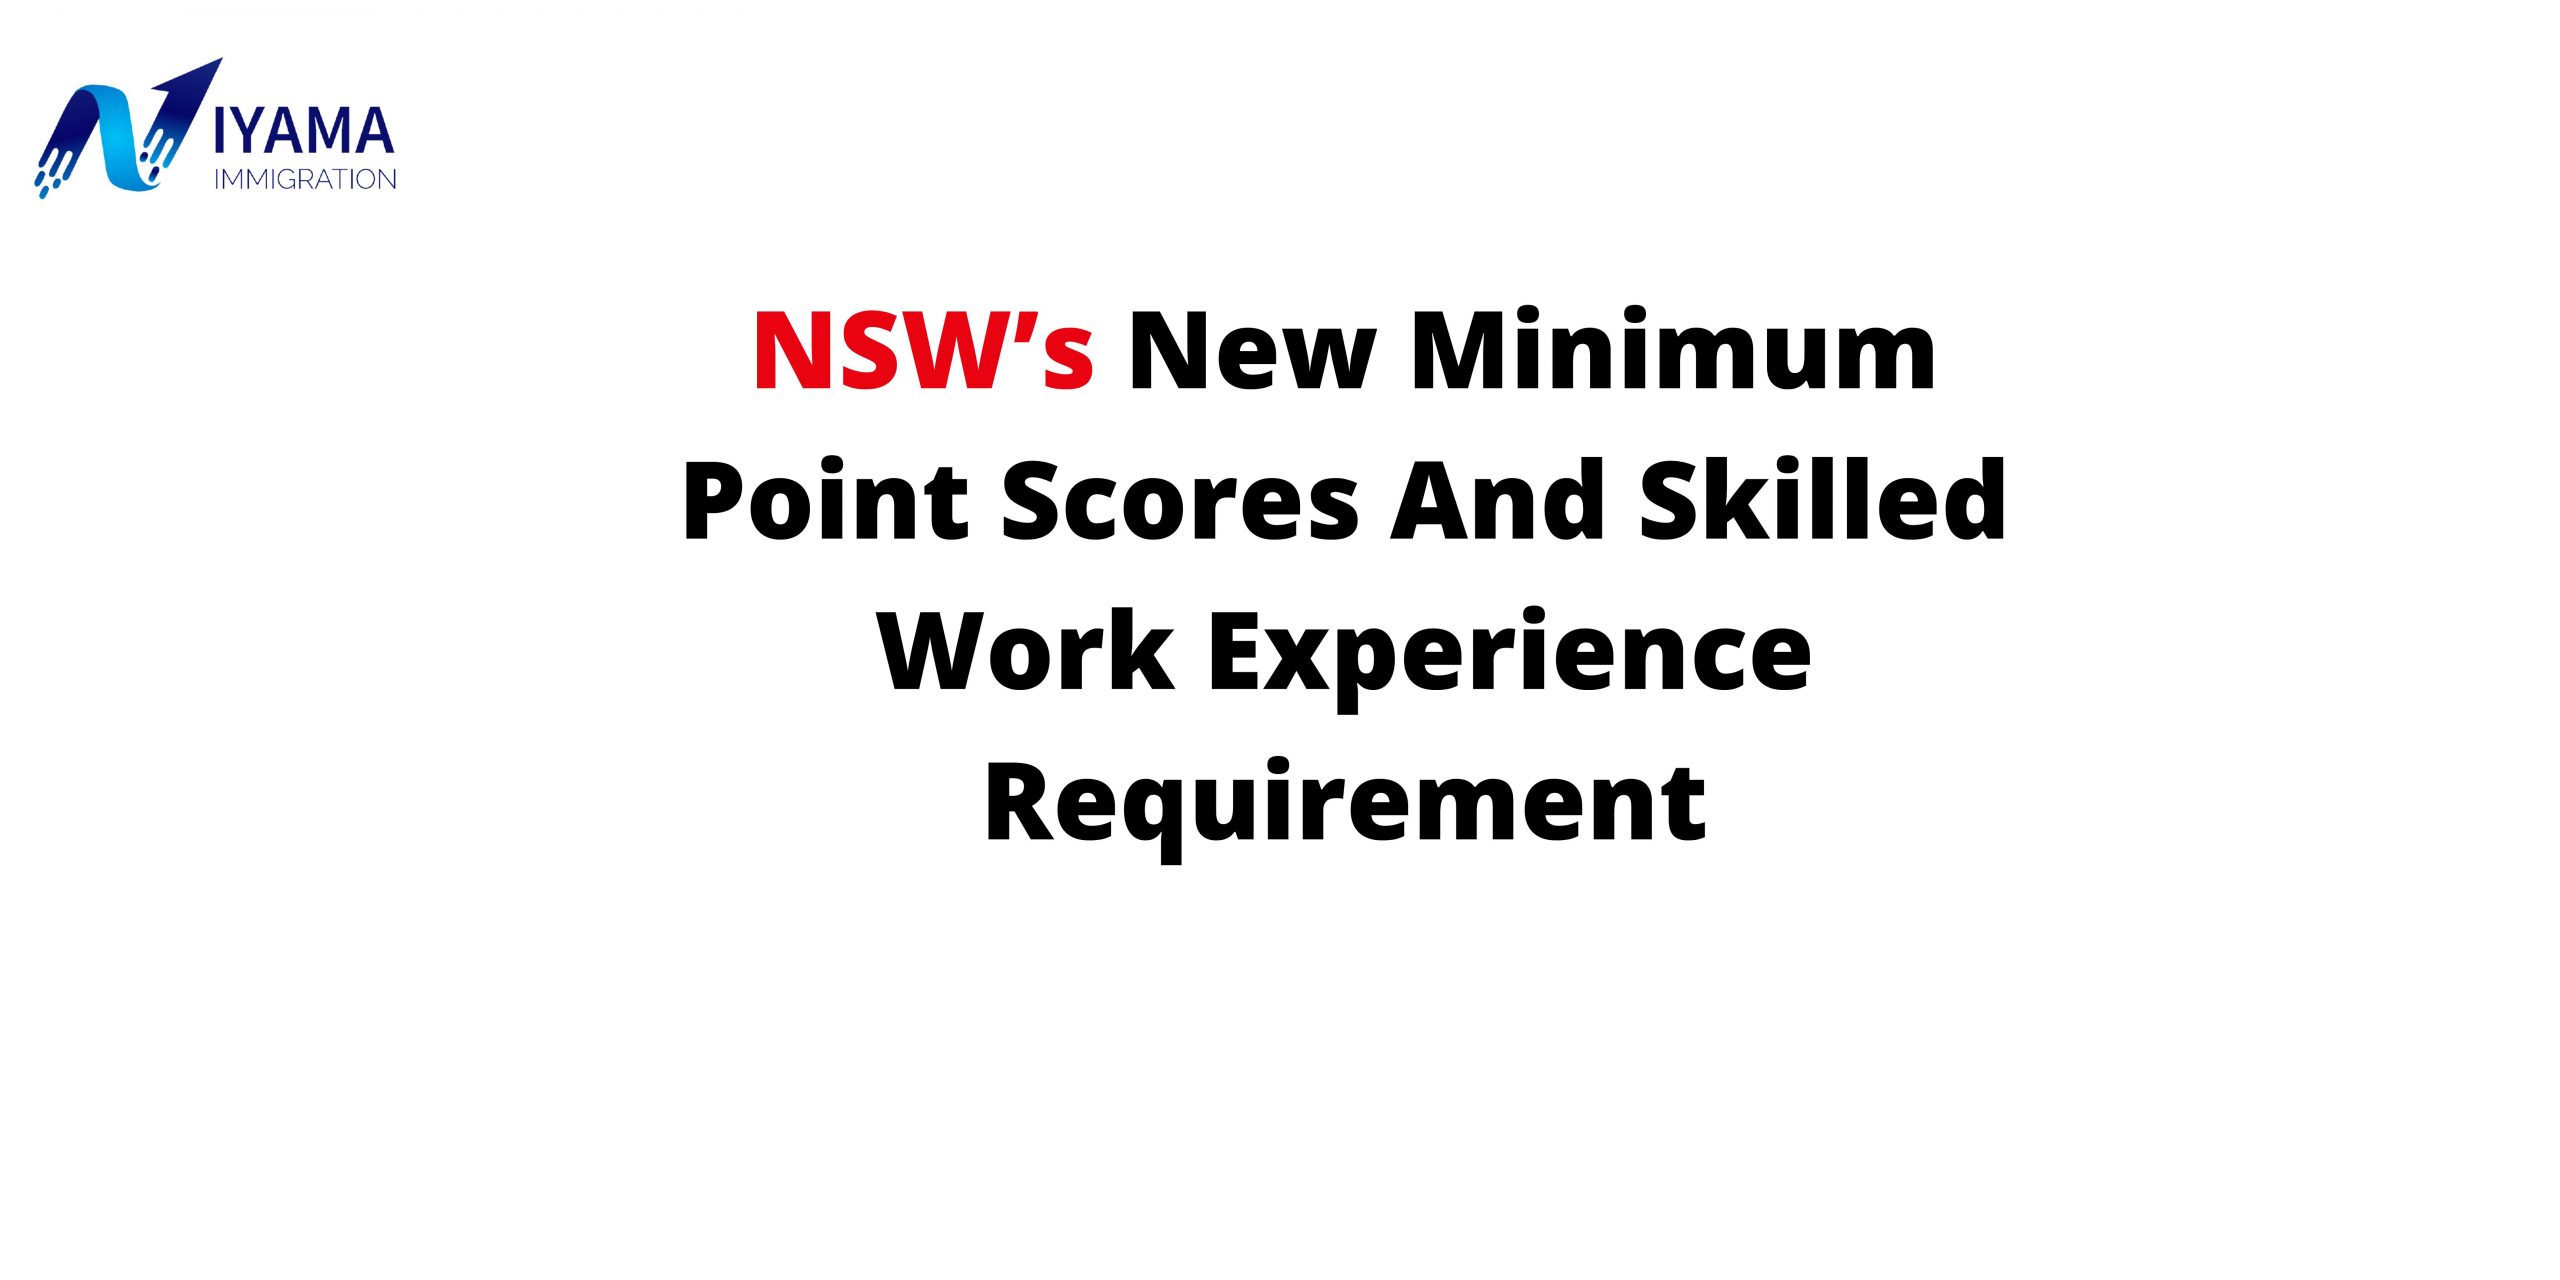 NSW's new minimum point scores and skilled work experience requirement